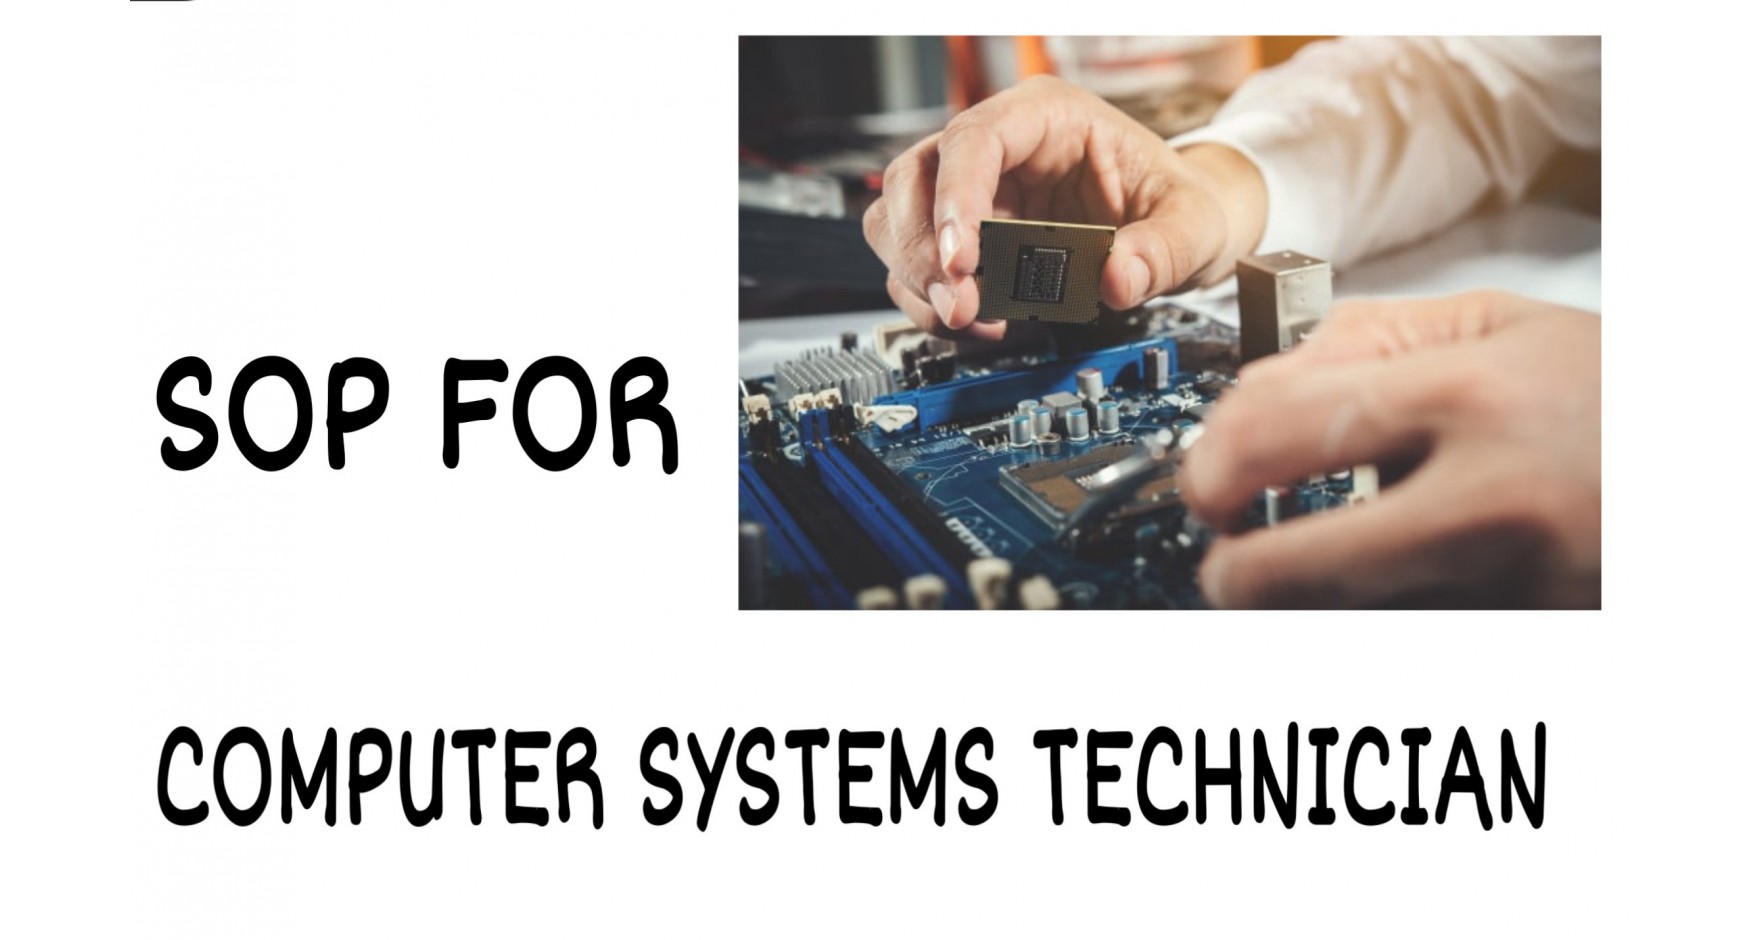 How to write SOP for Computer Systems Technician?